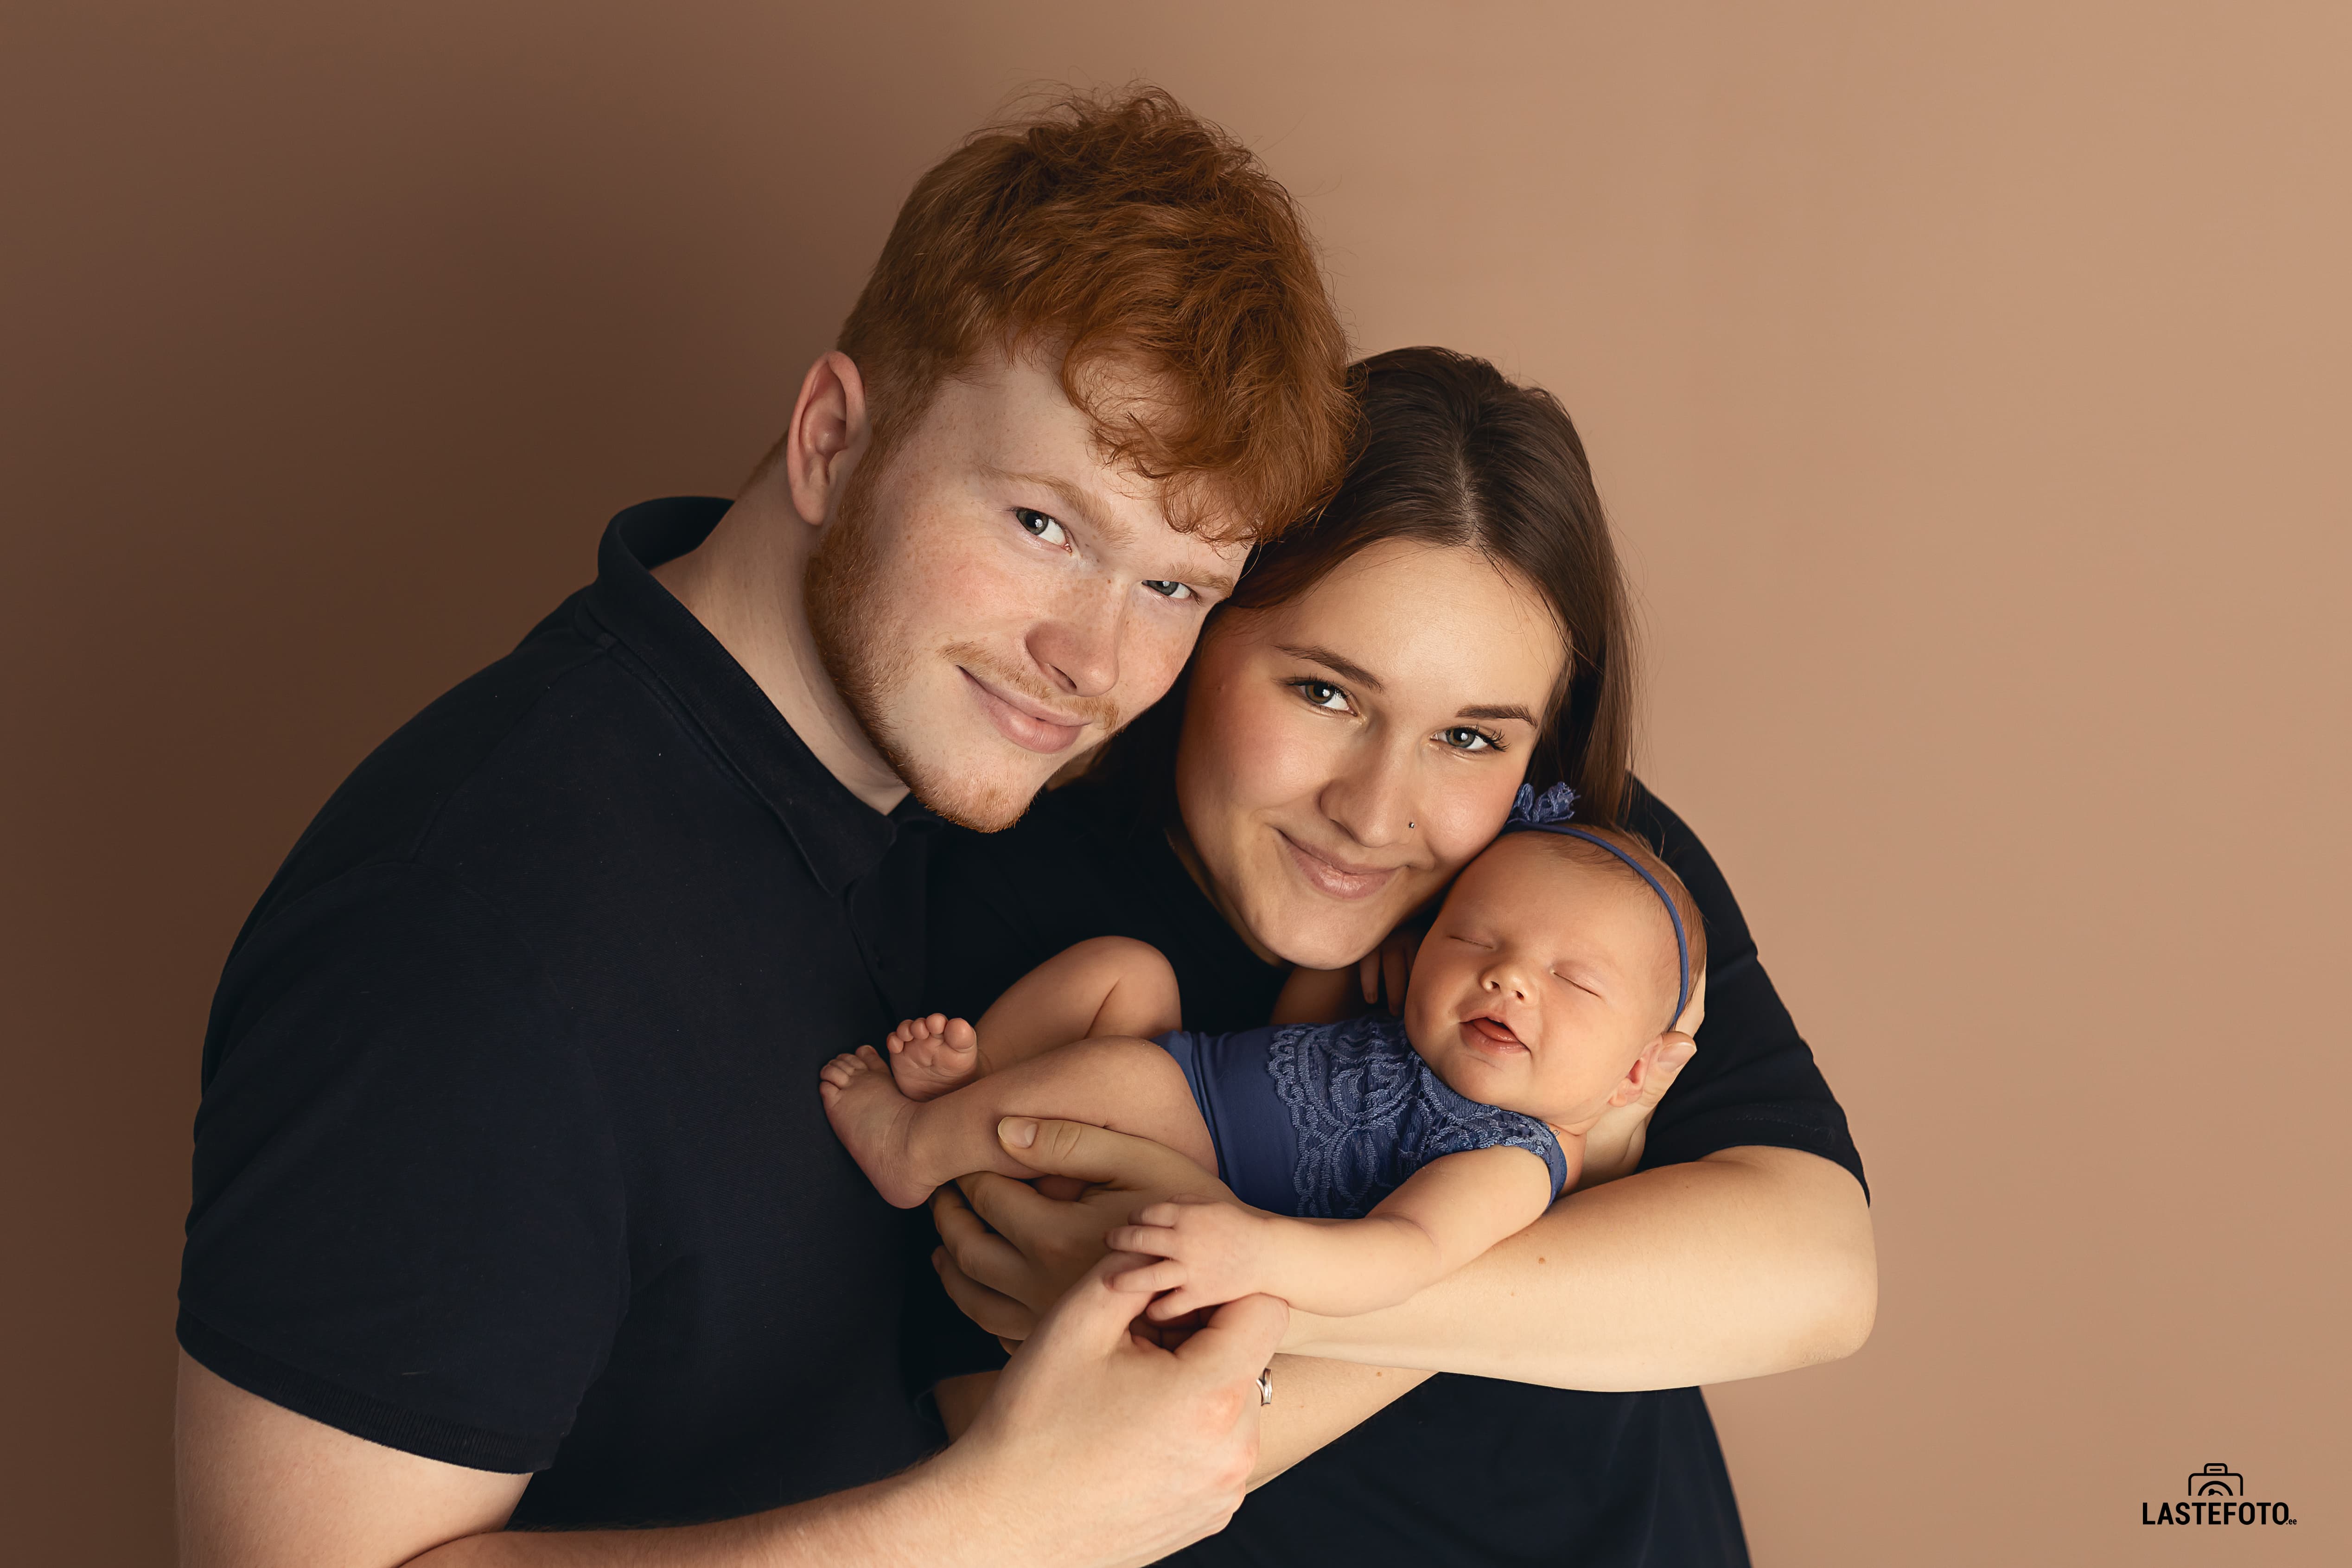 Smiling newborn baby with parents